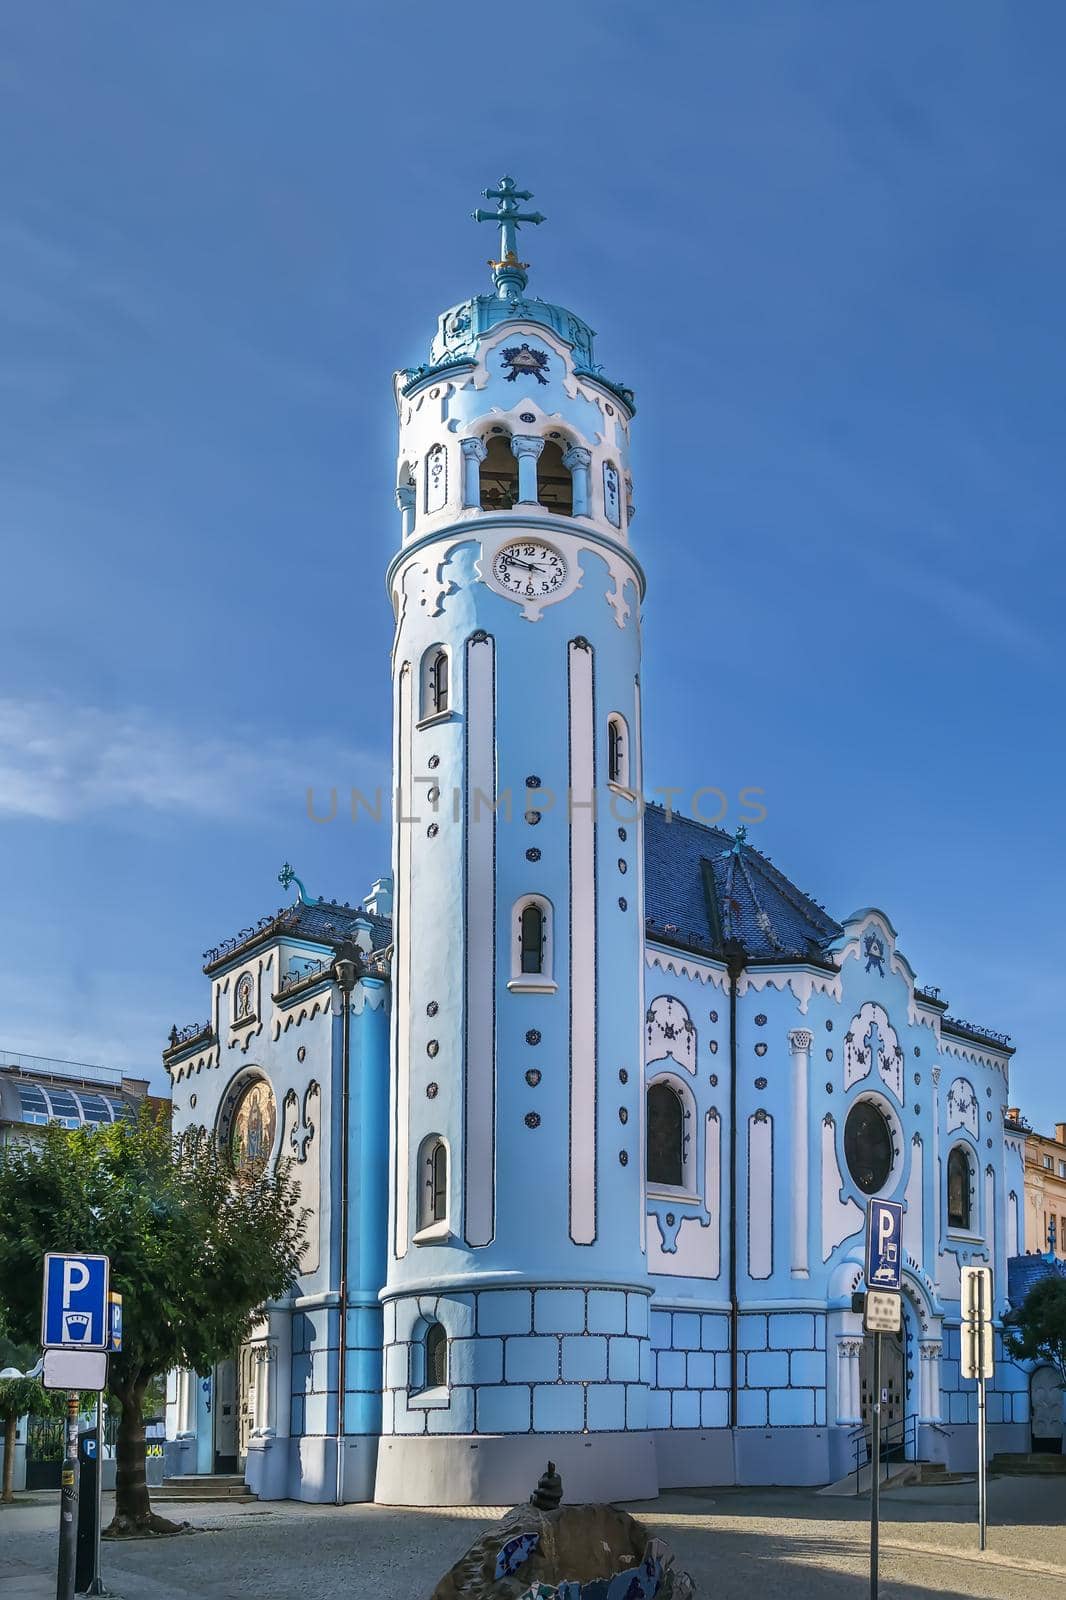 Church of St. Elizabeth commonly known as Blue Church is a Hungarian Secessionist (Jugendstil, Art Nouveau) Catholic church in Bratislava, Slovakia